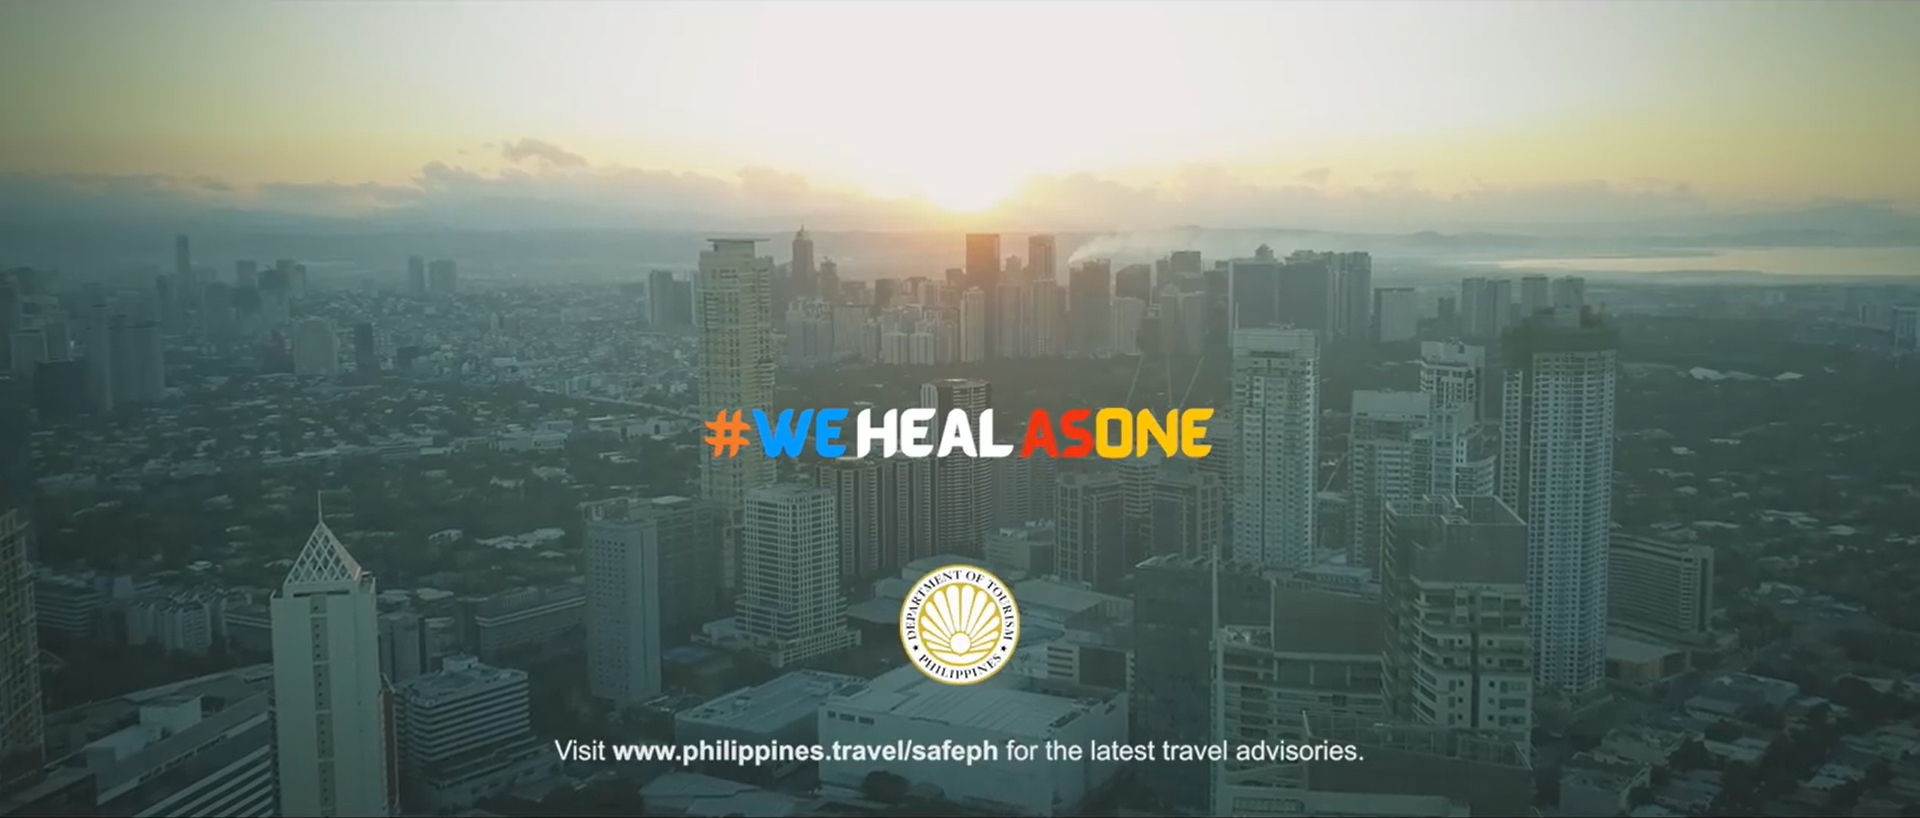 Tourism department releases video honoring country’s selfless front liners